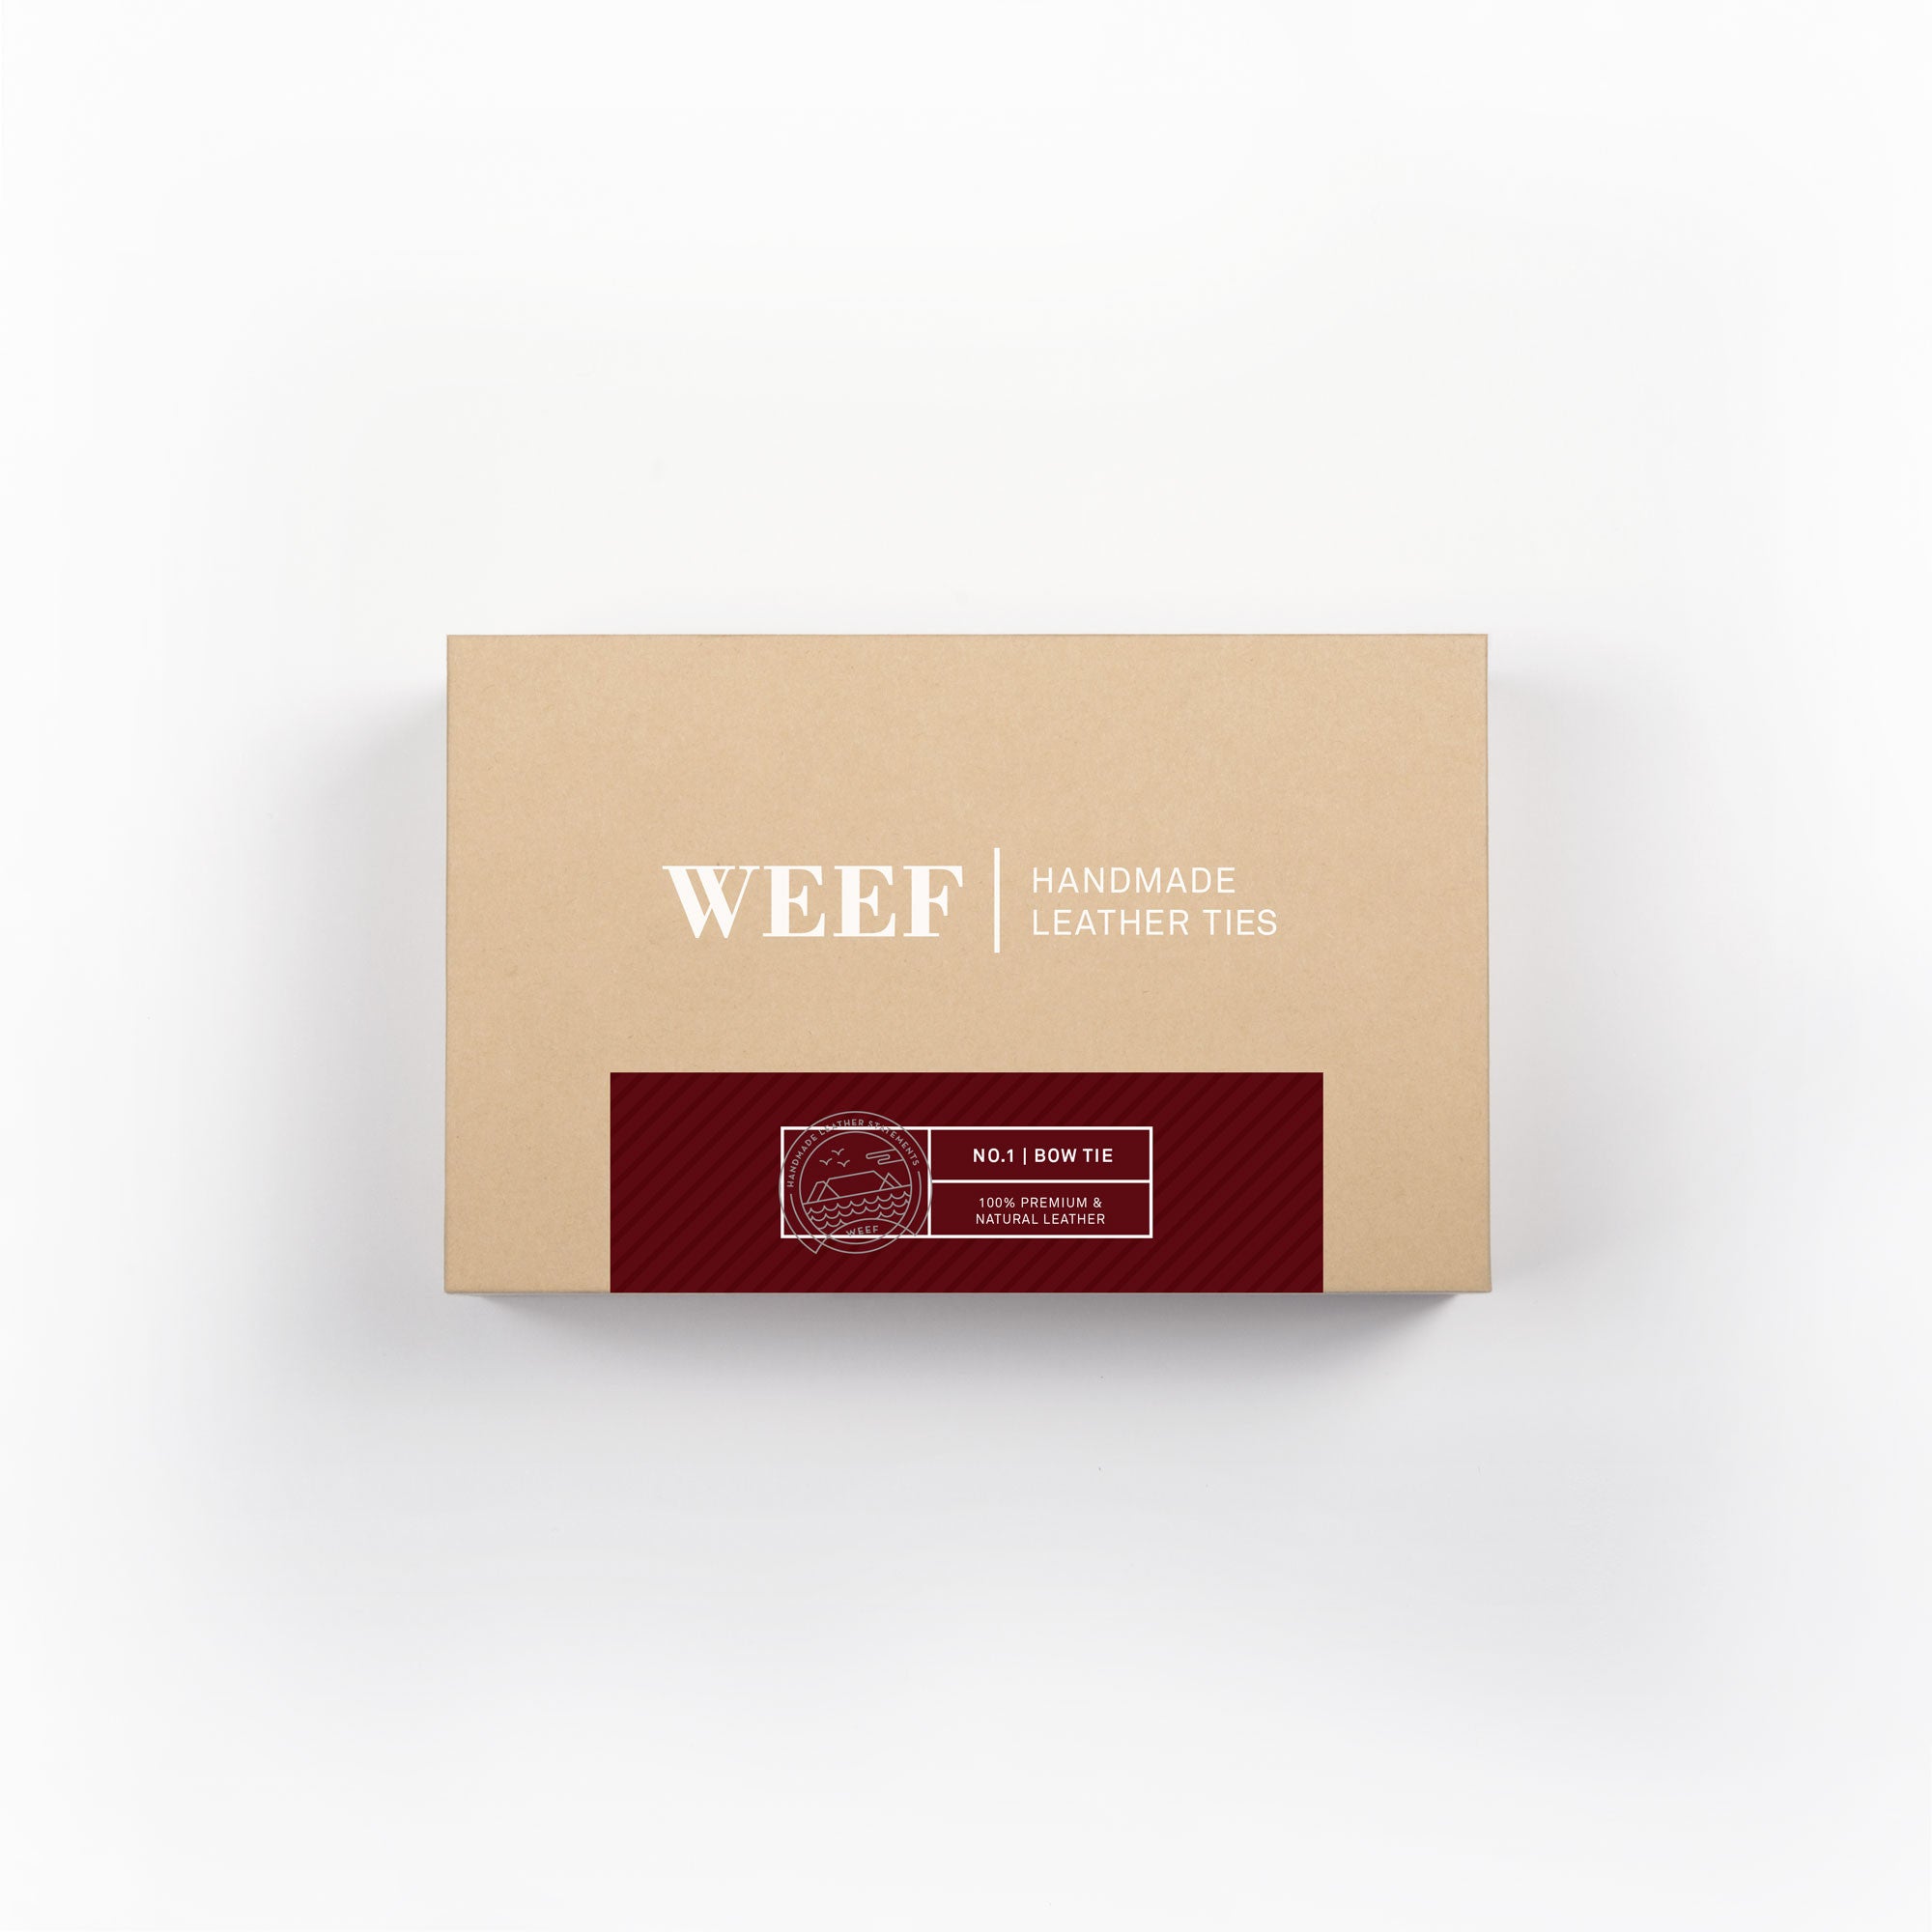 This is the premium packaging box of the oxblood red WEEF handmade leather bow tie.